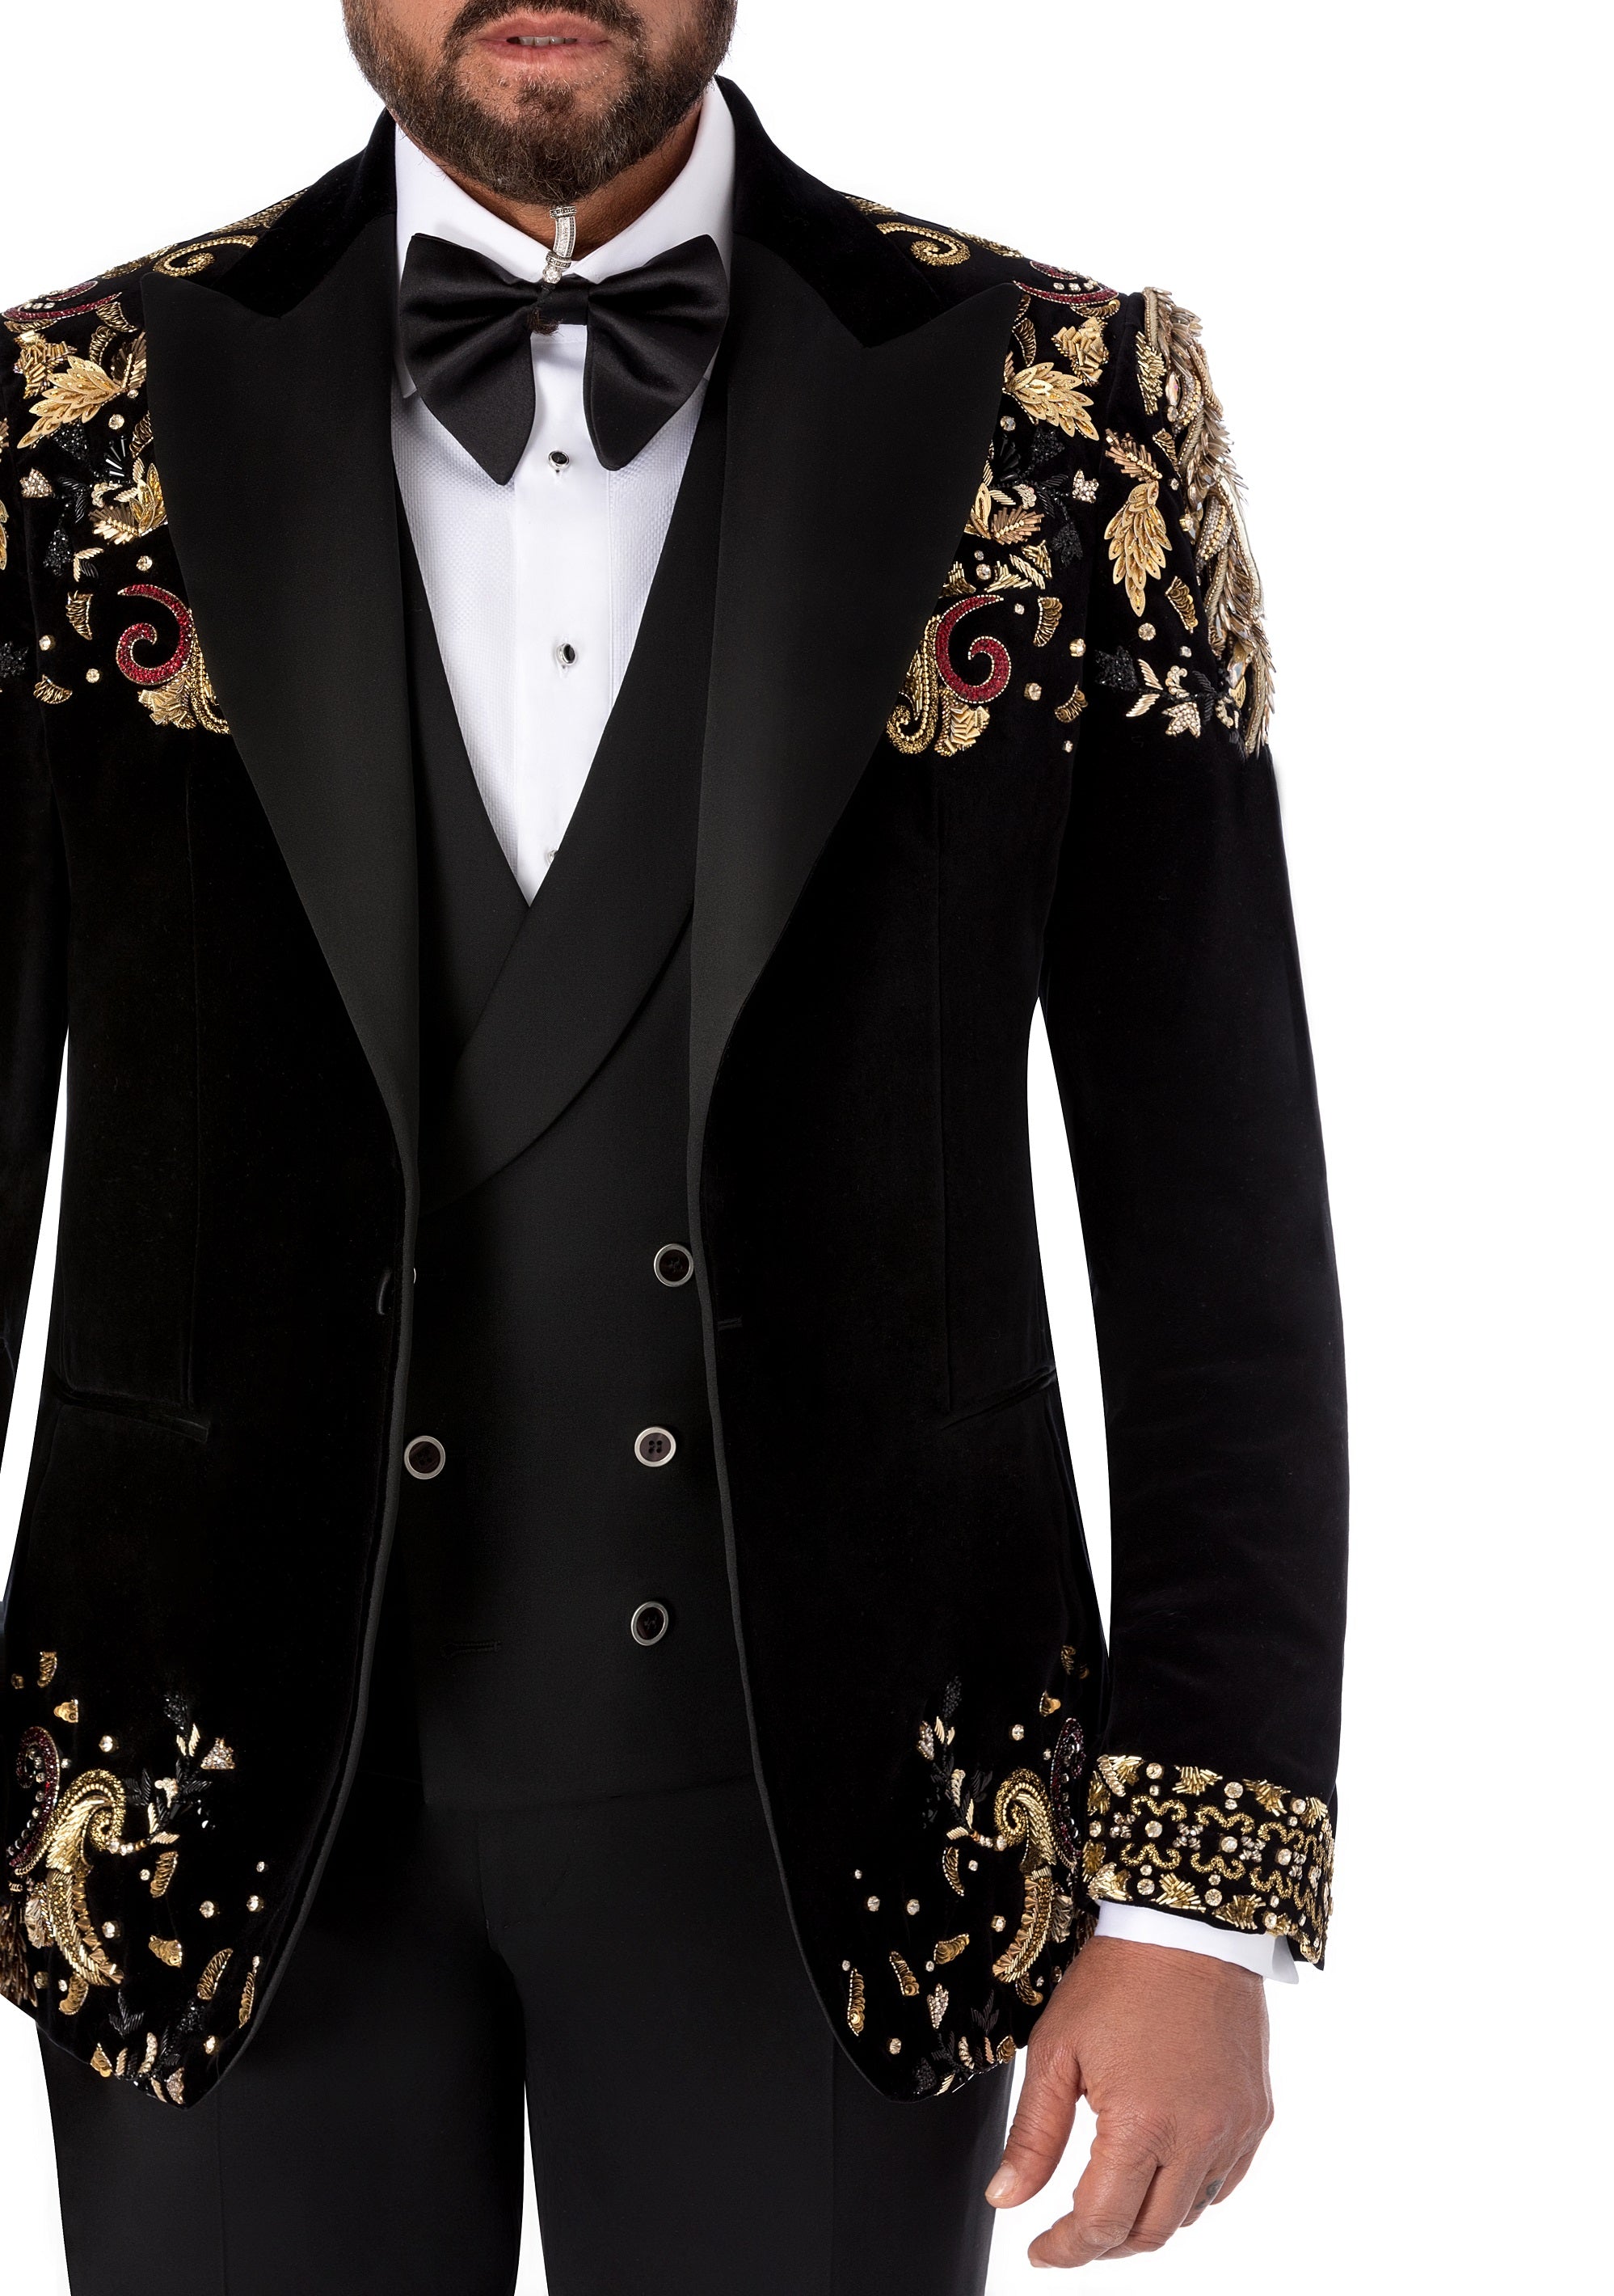 Black velvet tuxedo jacket with embroidery and natural stones